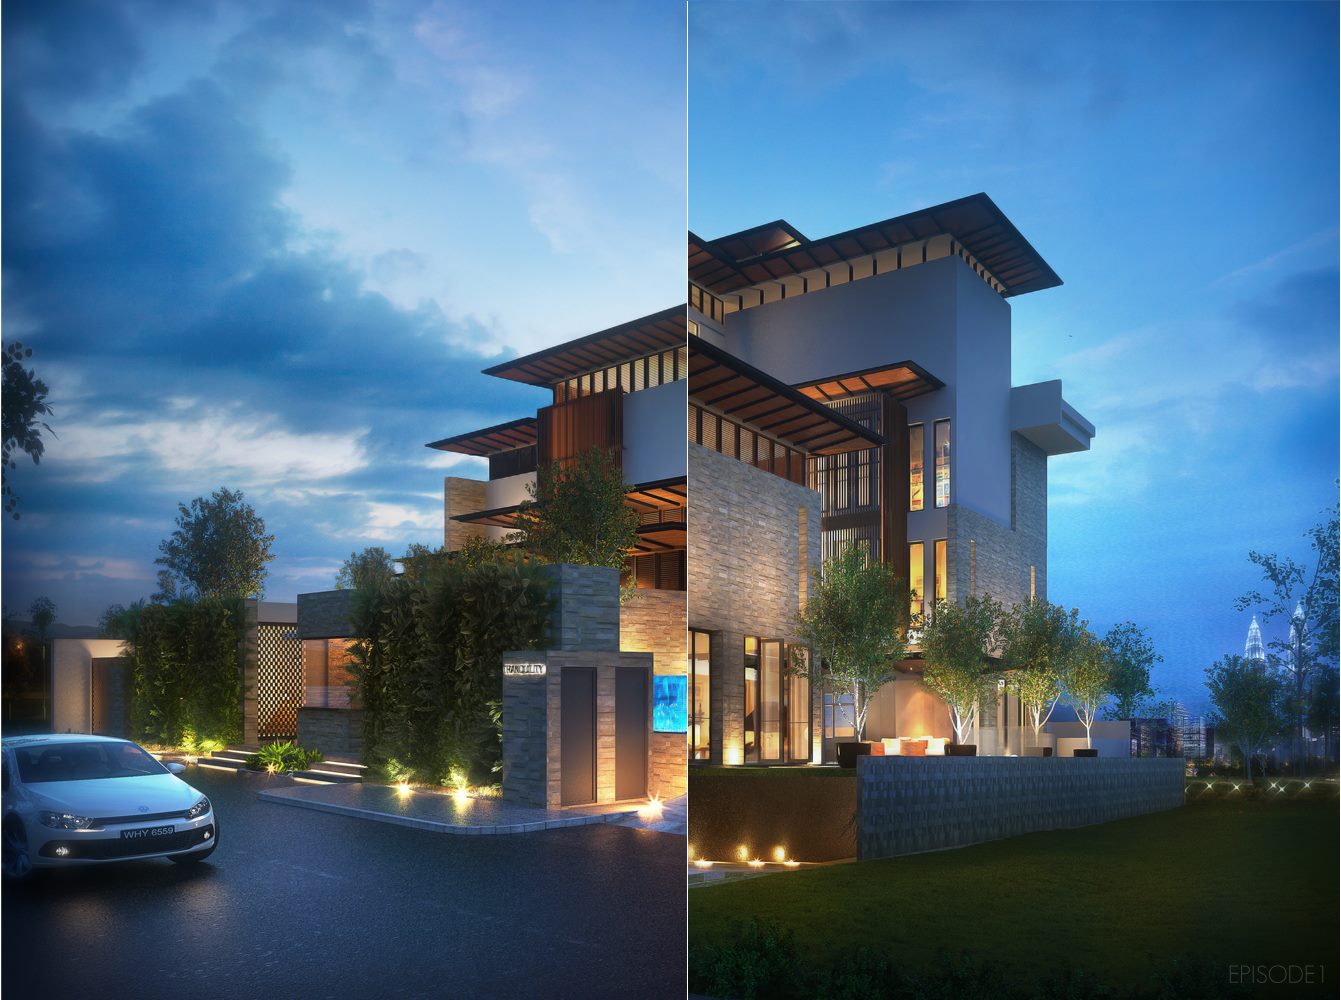 Realistic Exterior Rendering In 3ds Max Vray. exterior ...